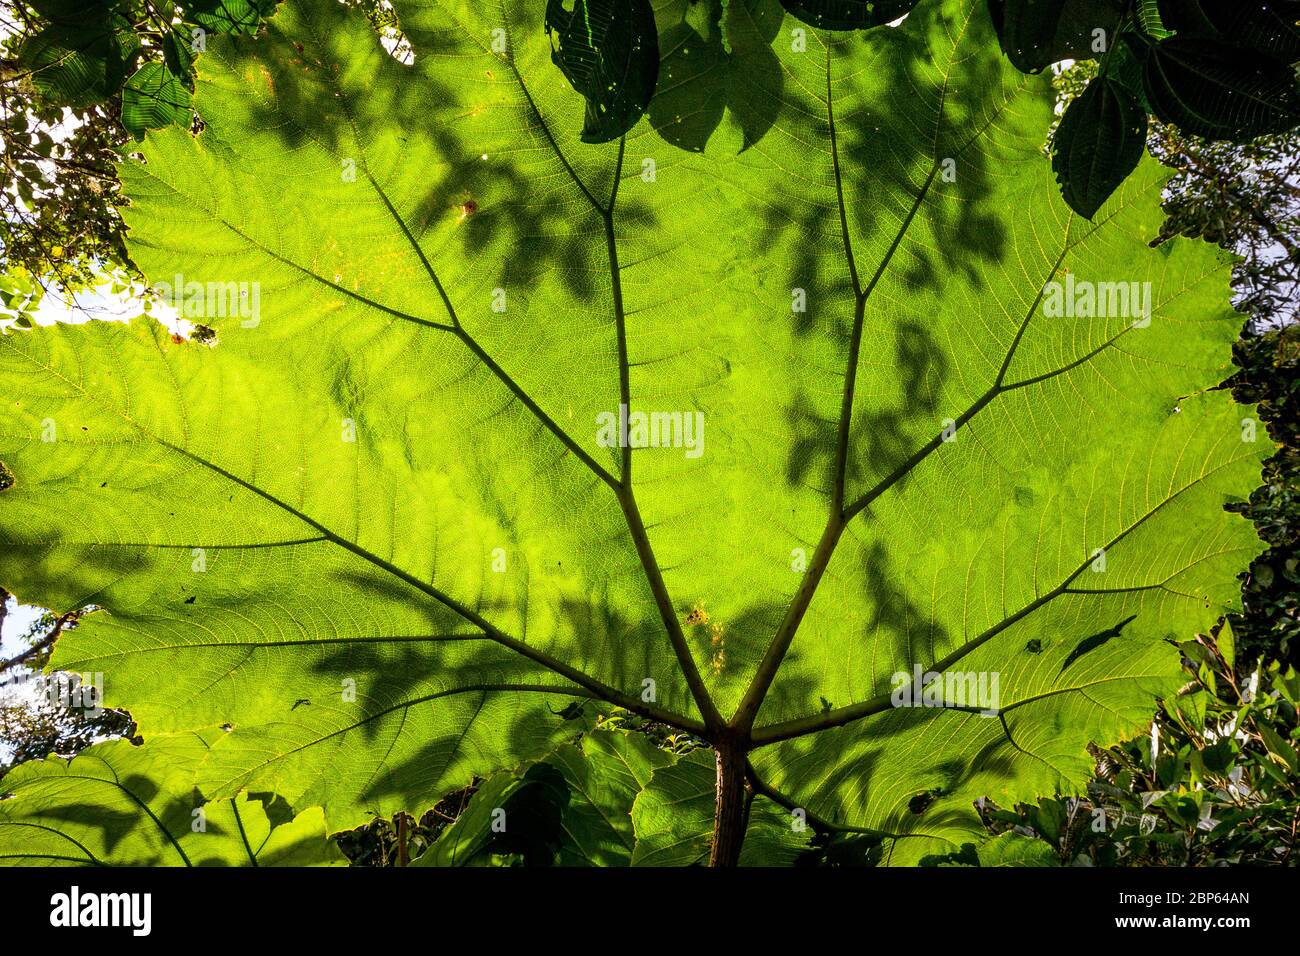 Large leaves in the cloudforest of La Amistad national park, Chiriqui province, Republic of Panama. Stock Photo